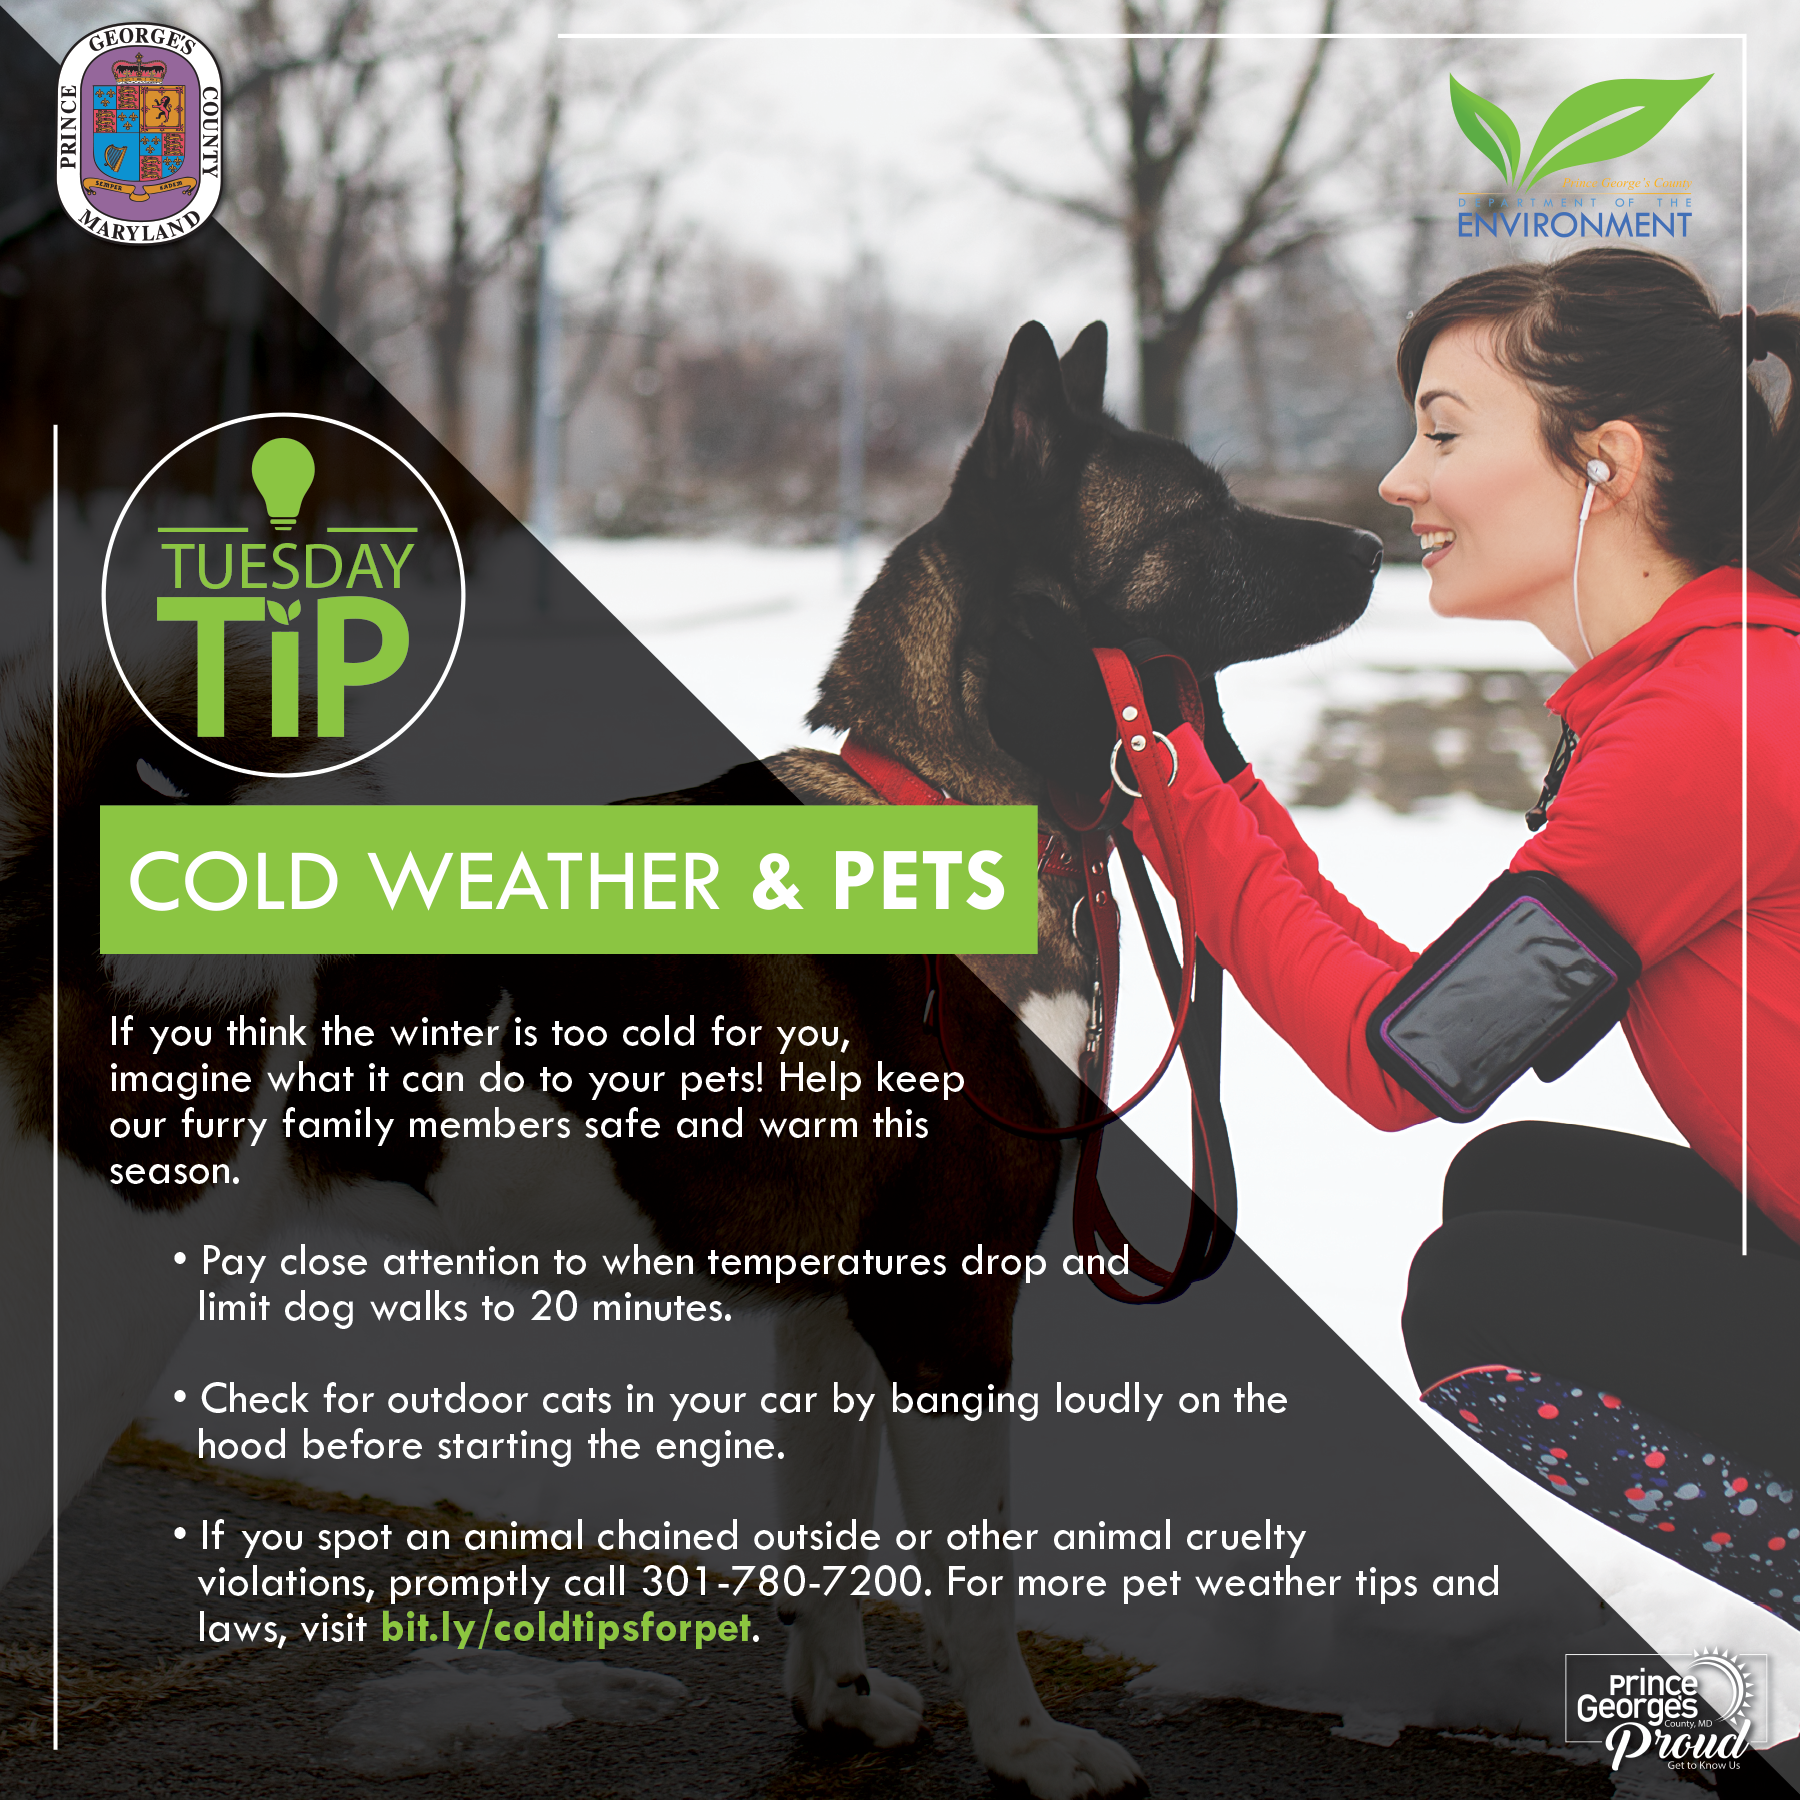 Tues tip 12.14.21 Cold weather pets eng